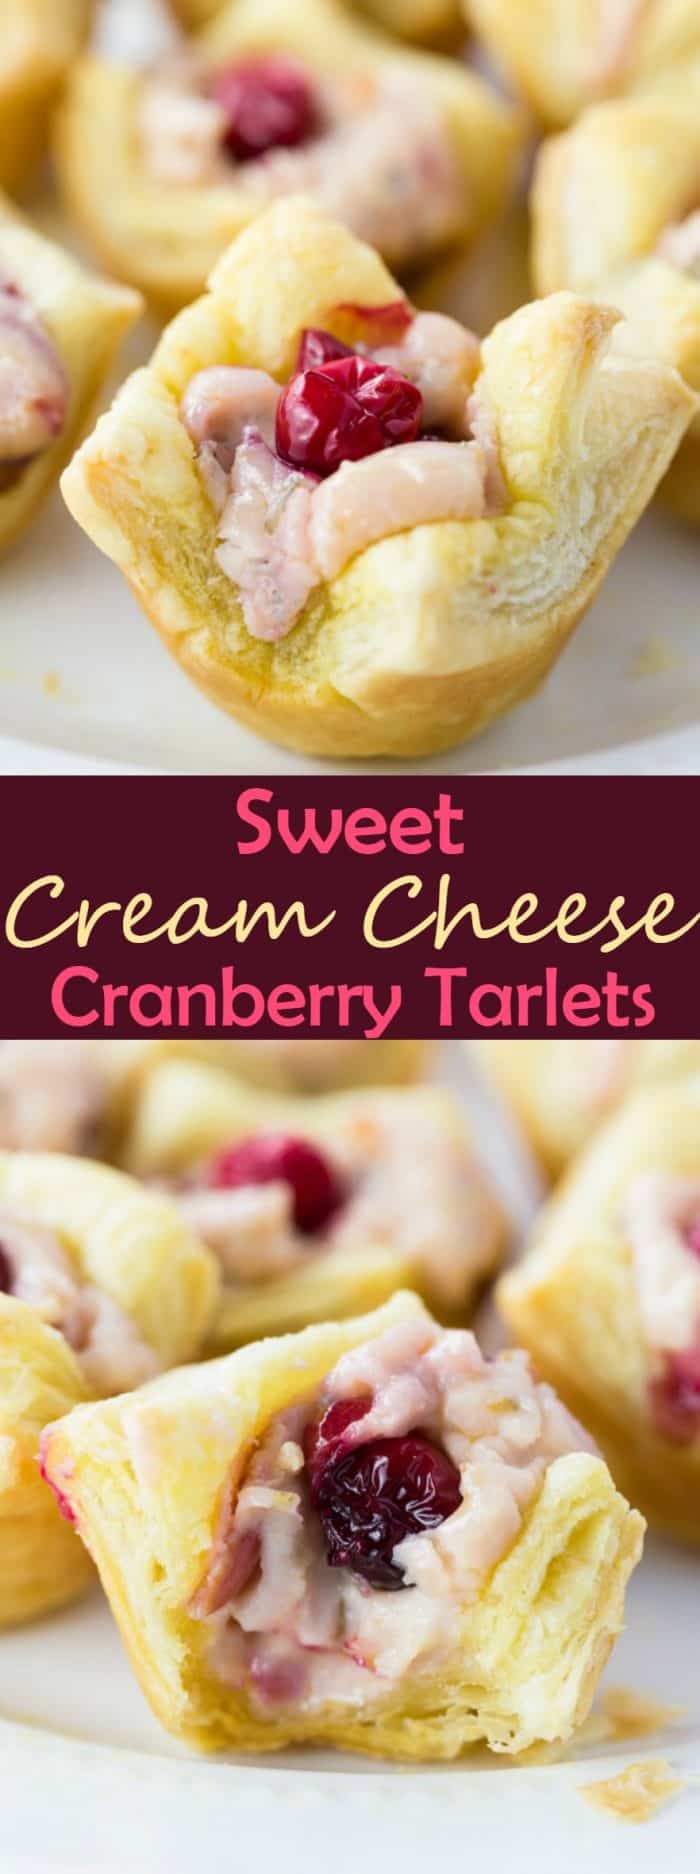 A sweet and creamy cranberry cream cheese mixture baked to perfection over thin, flanky layers of golden puff pastry. #christmas #pastry #puffpastry #cranberry #dessert #appetizer #creamcheese